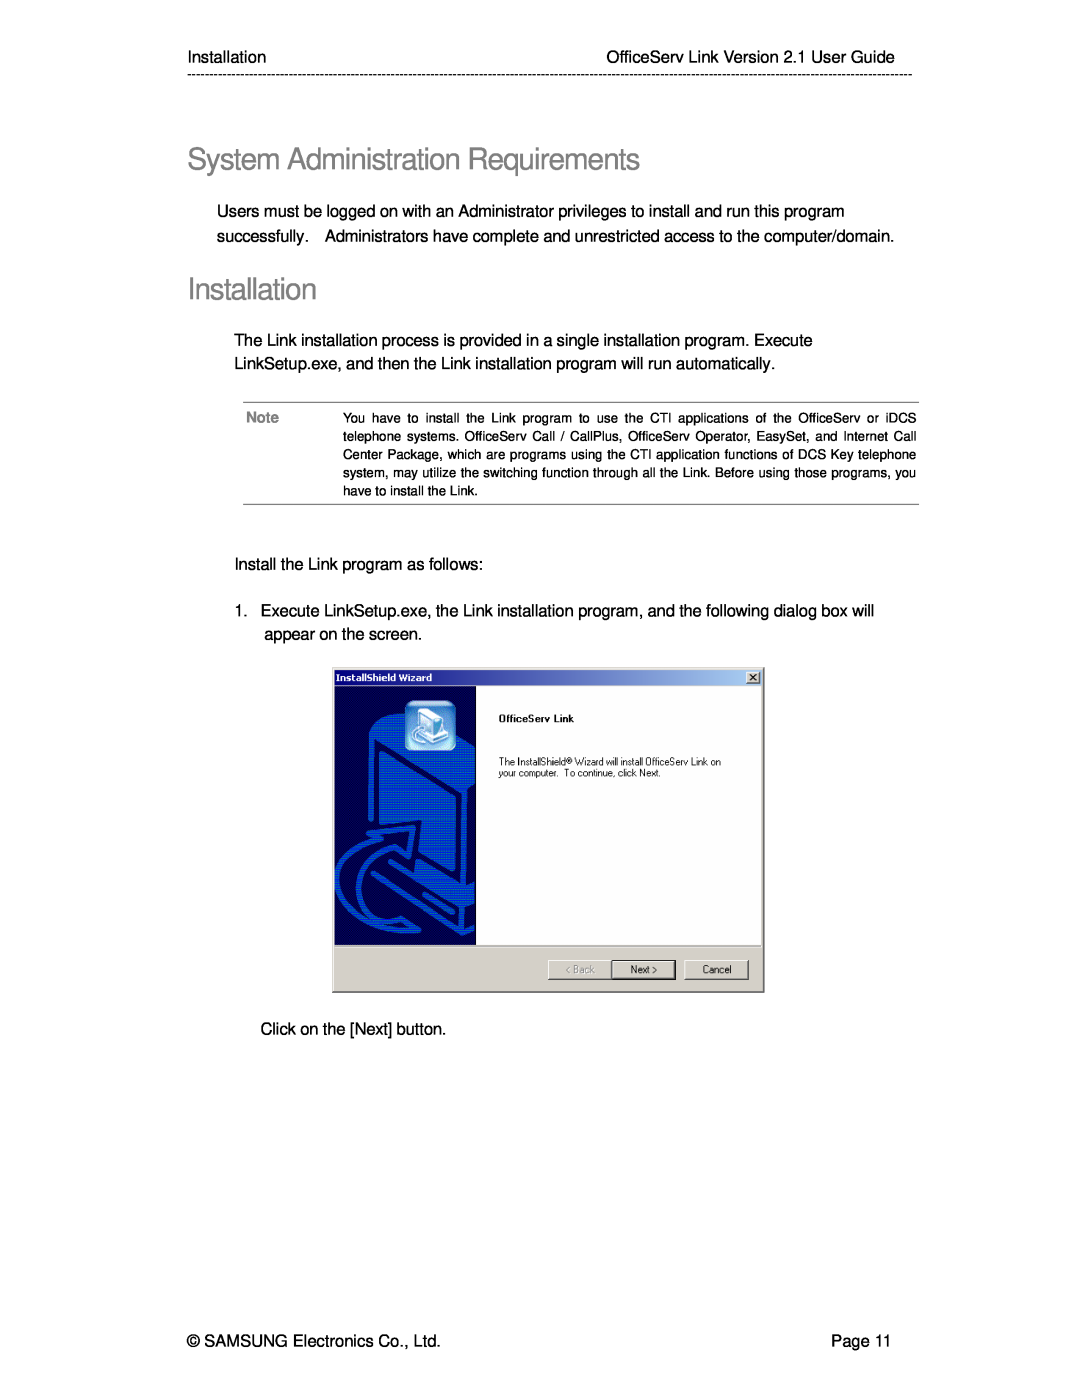 Samsung Version 2.1 manual System Administration Requirements, Installation, Page 